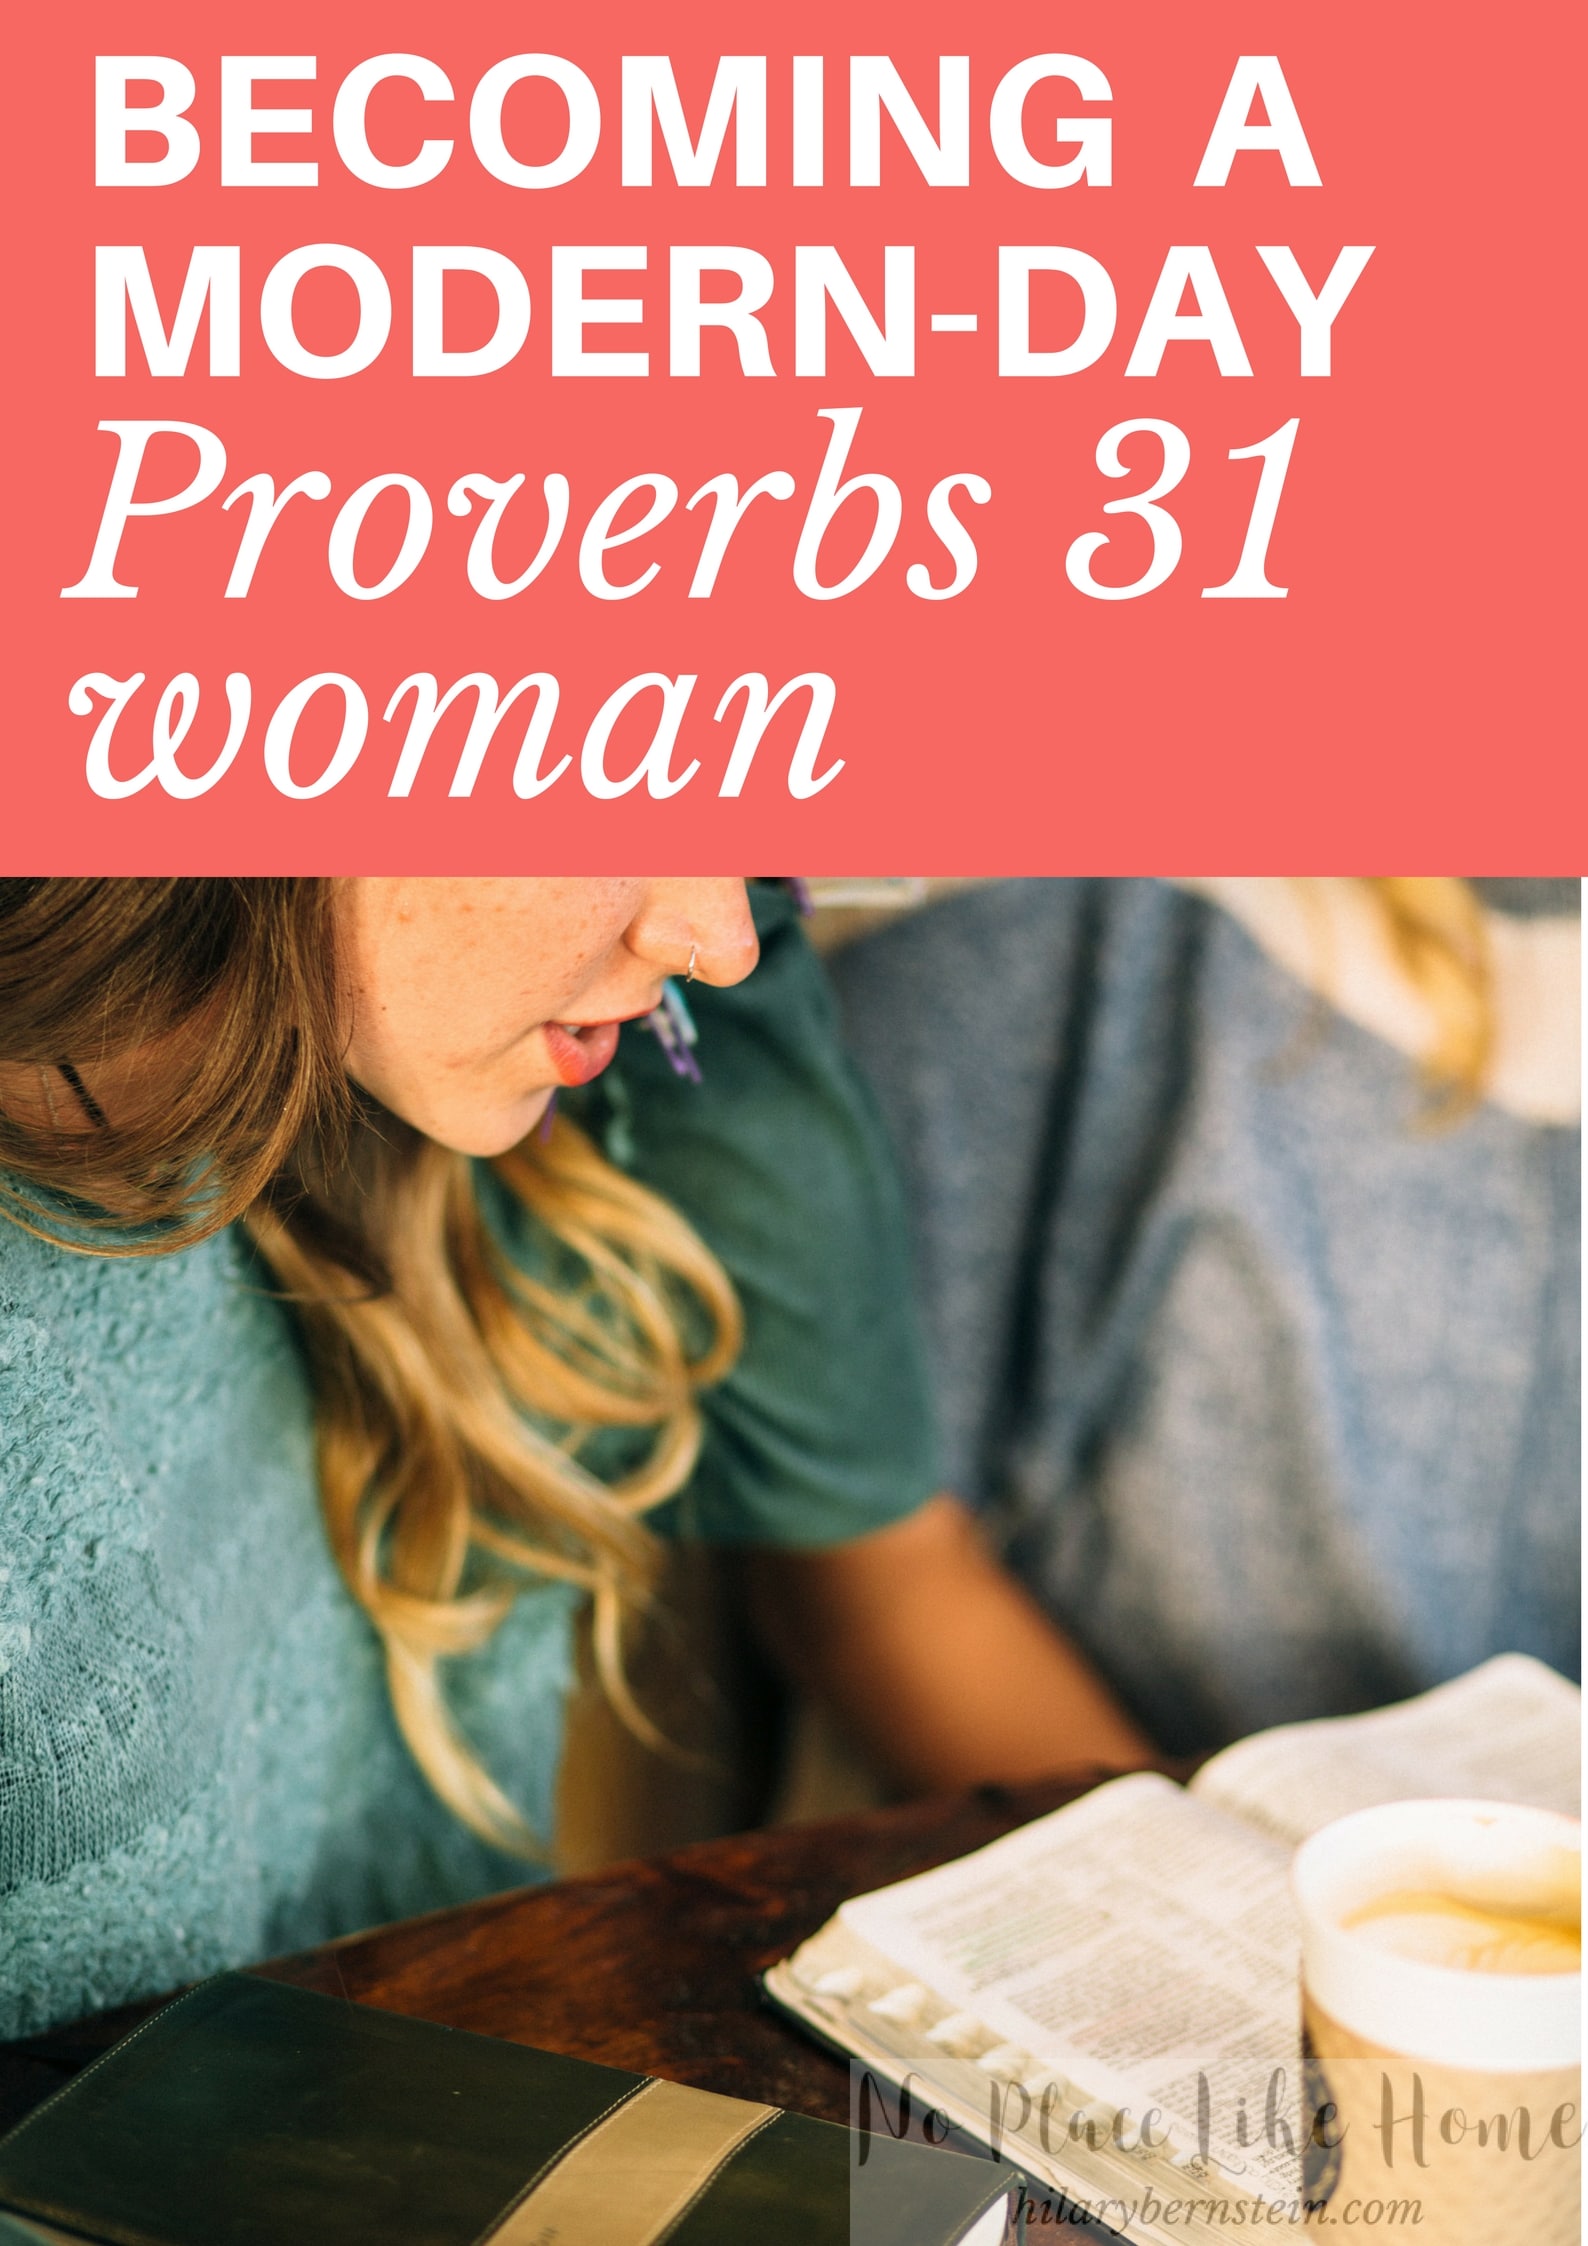 The example of the Proverbs 31 woman is timeless ... she still has lessons to teach a modern day Proverbs 31 woman.